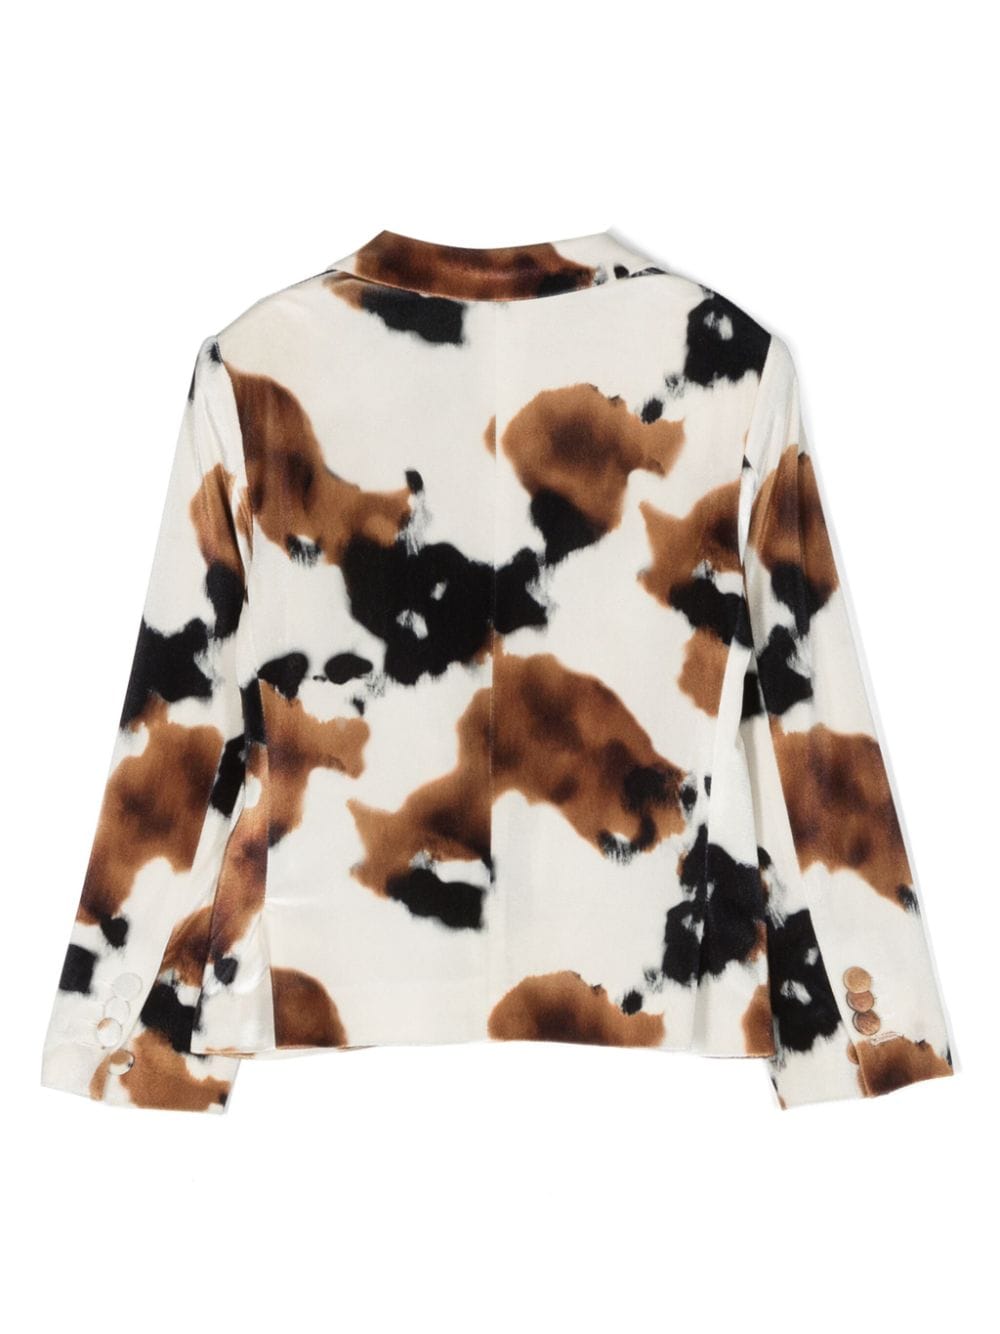 Cow print single breasted jacket